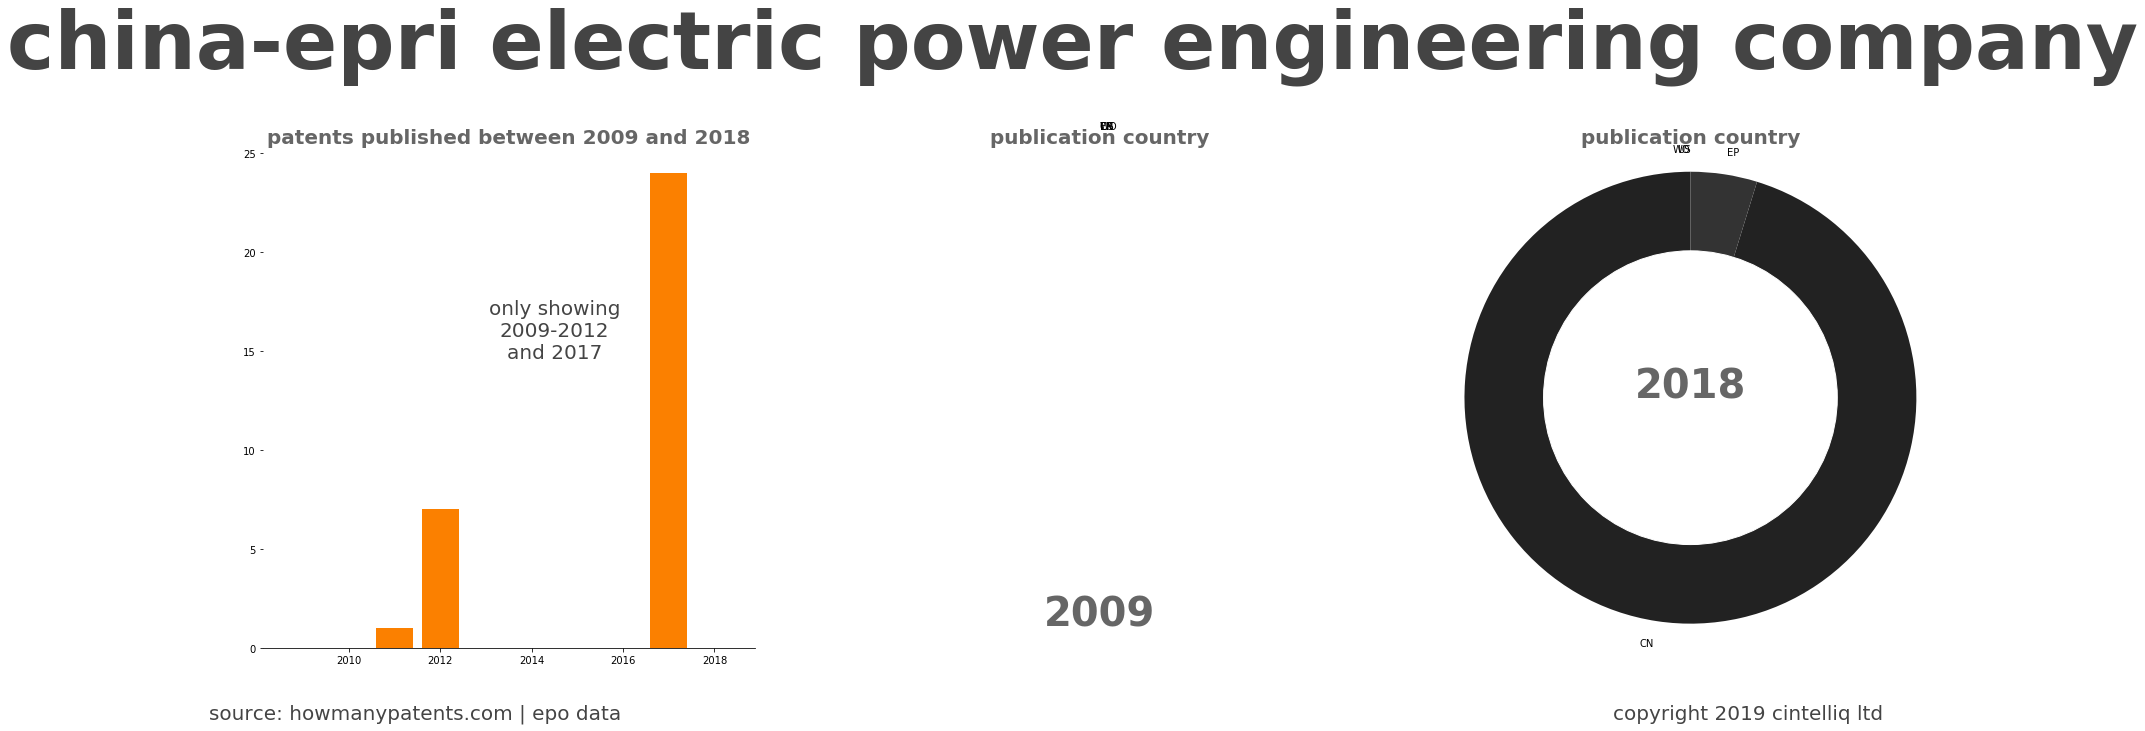 summary of patents for China-Epri Electric Power Engineering Company